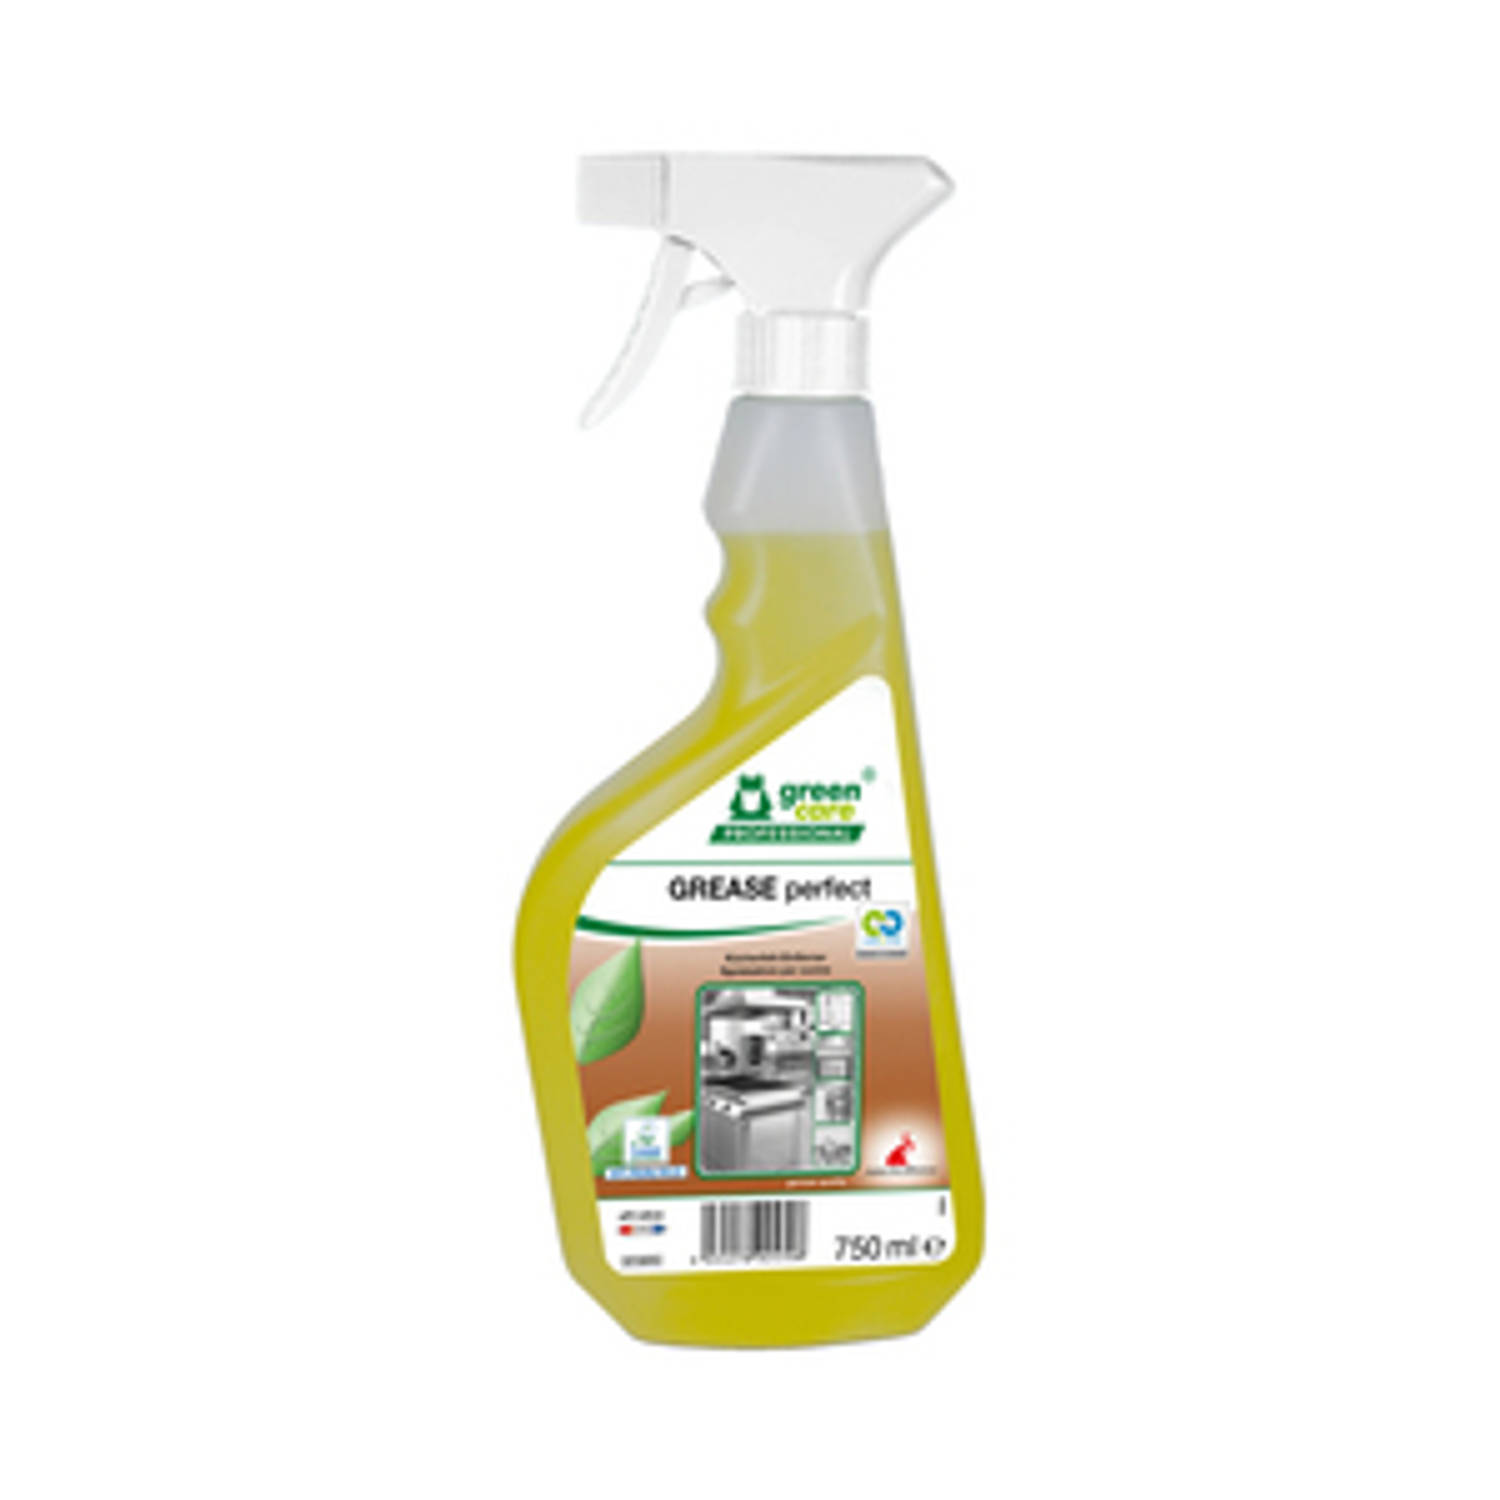 Green care grease perfect (750ml)